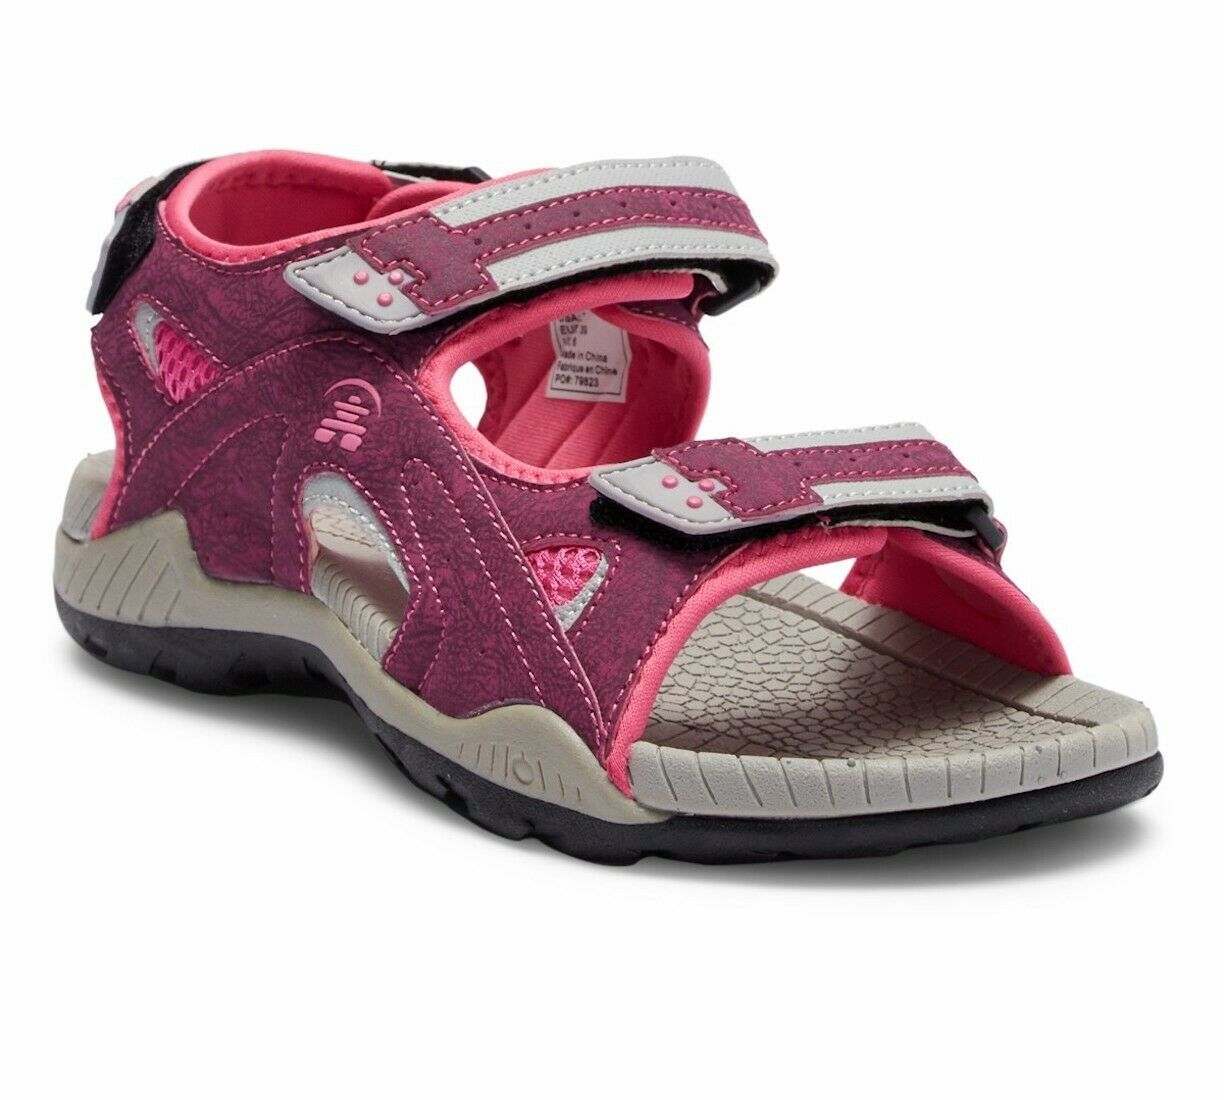 Primary image for Kamik Sandals Lobster Waterproof Fuschia Gray Size BK6 or W7 New in Box